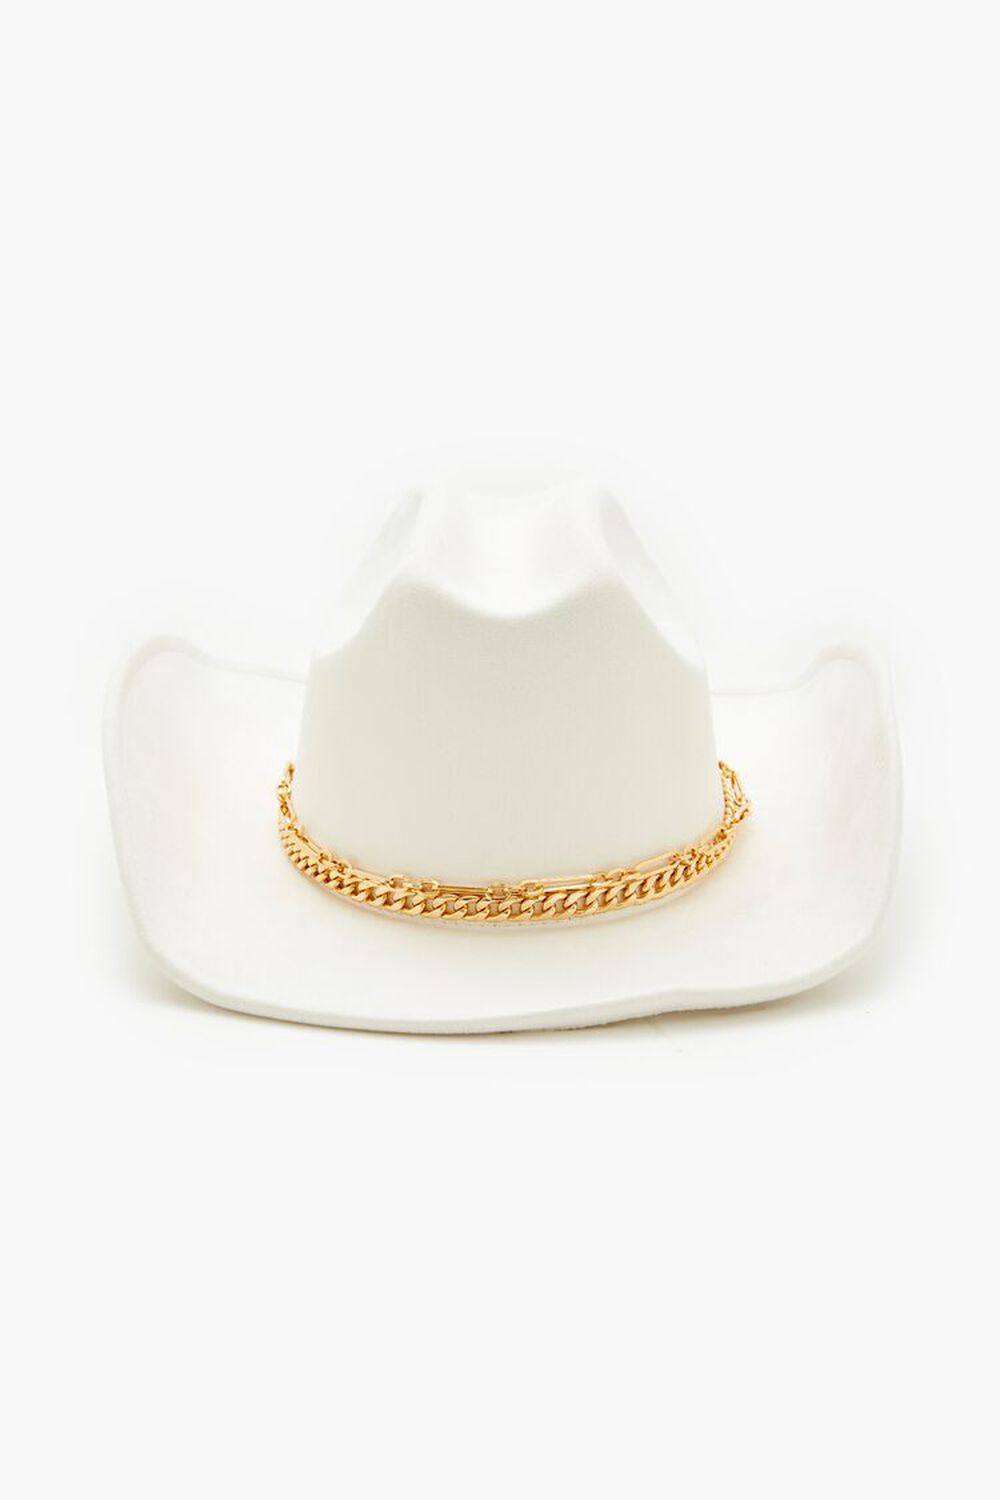 WHITE/GOLD Chain-Trim Brushed Cowboy Hat, image 1